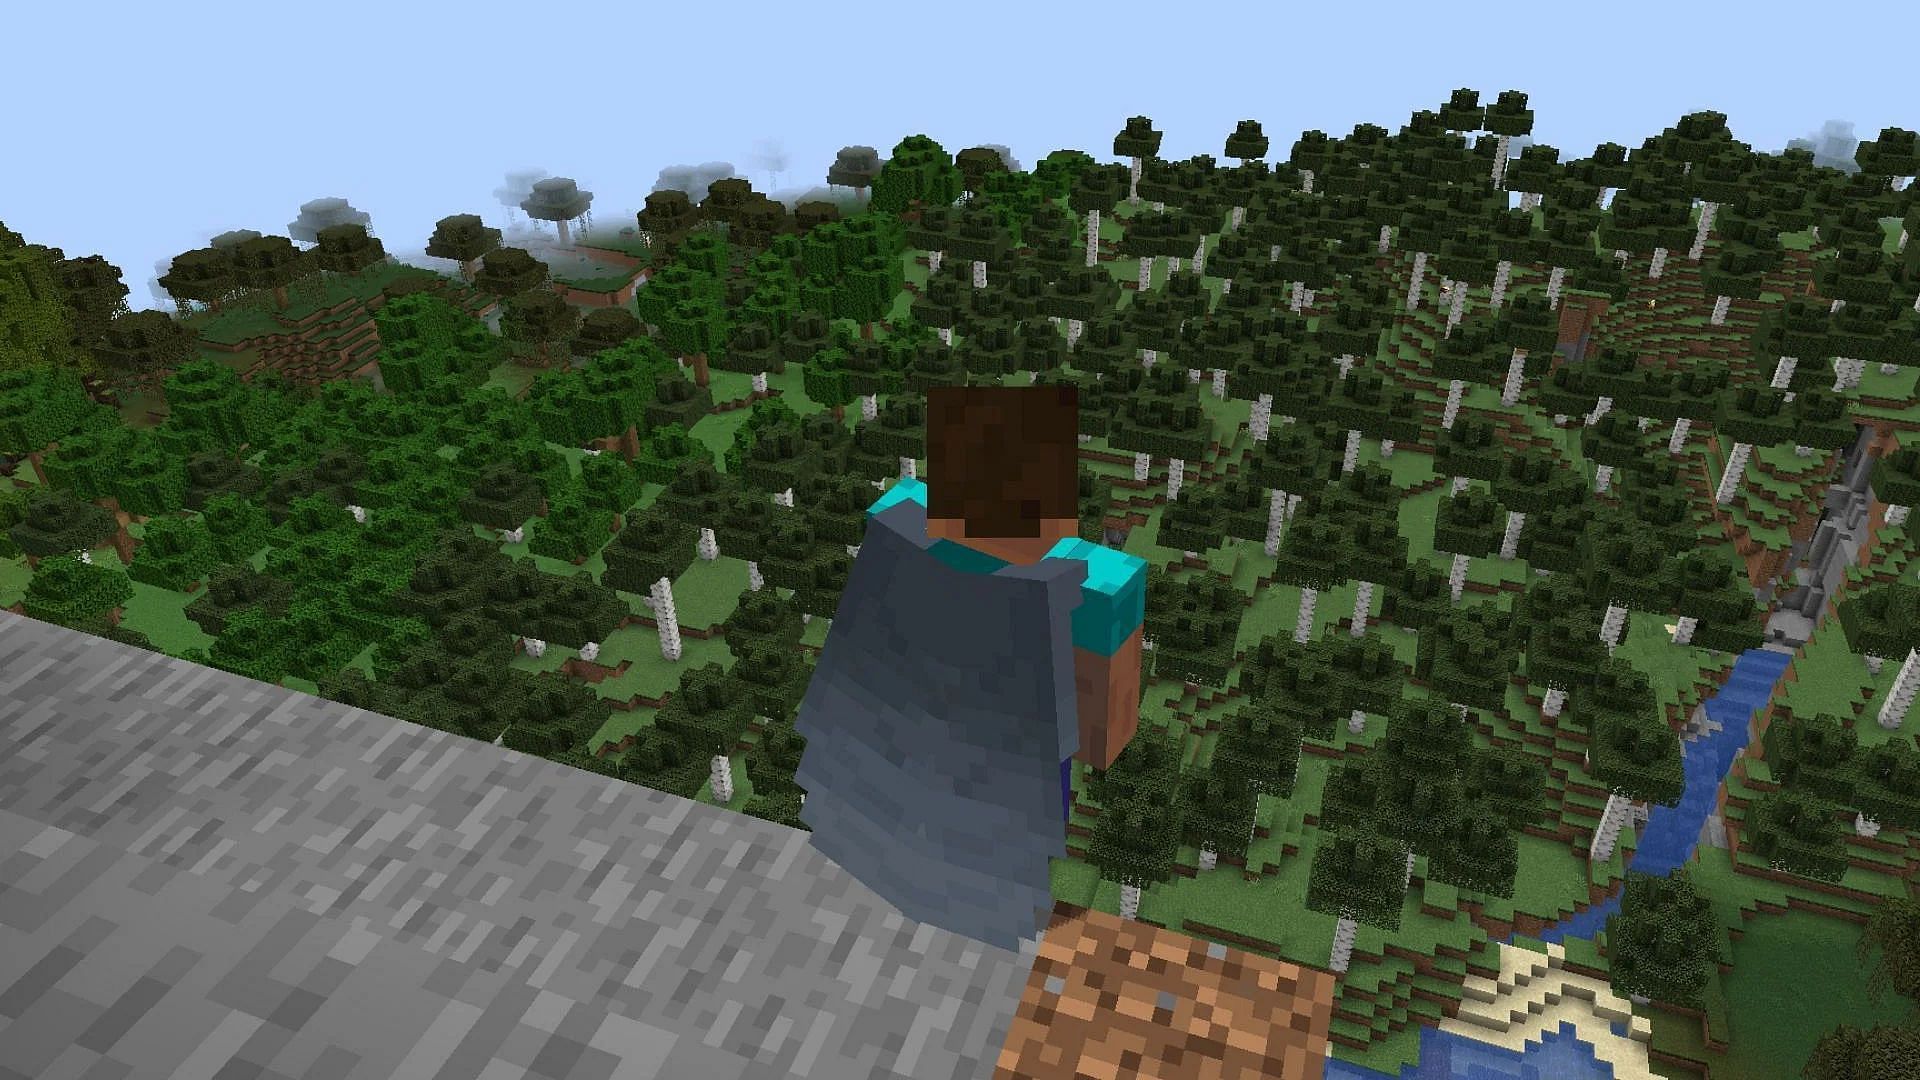 If players have some speed while landing, they can take major fall damage in Minecraft (Image via Mojang)